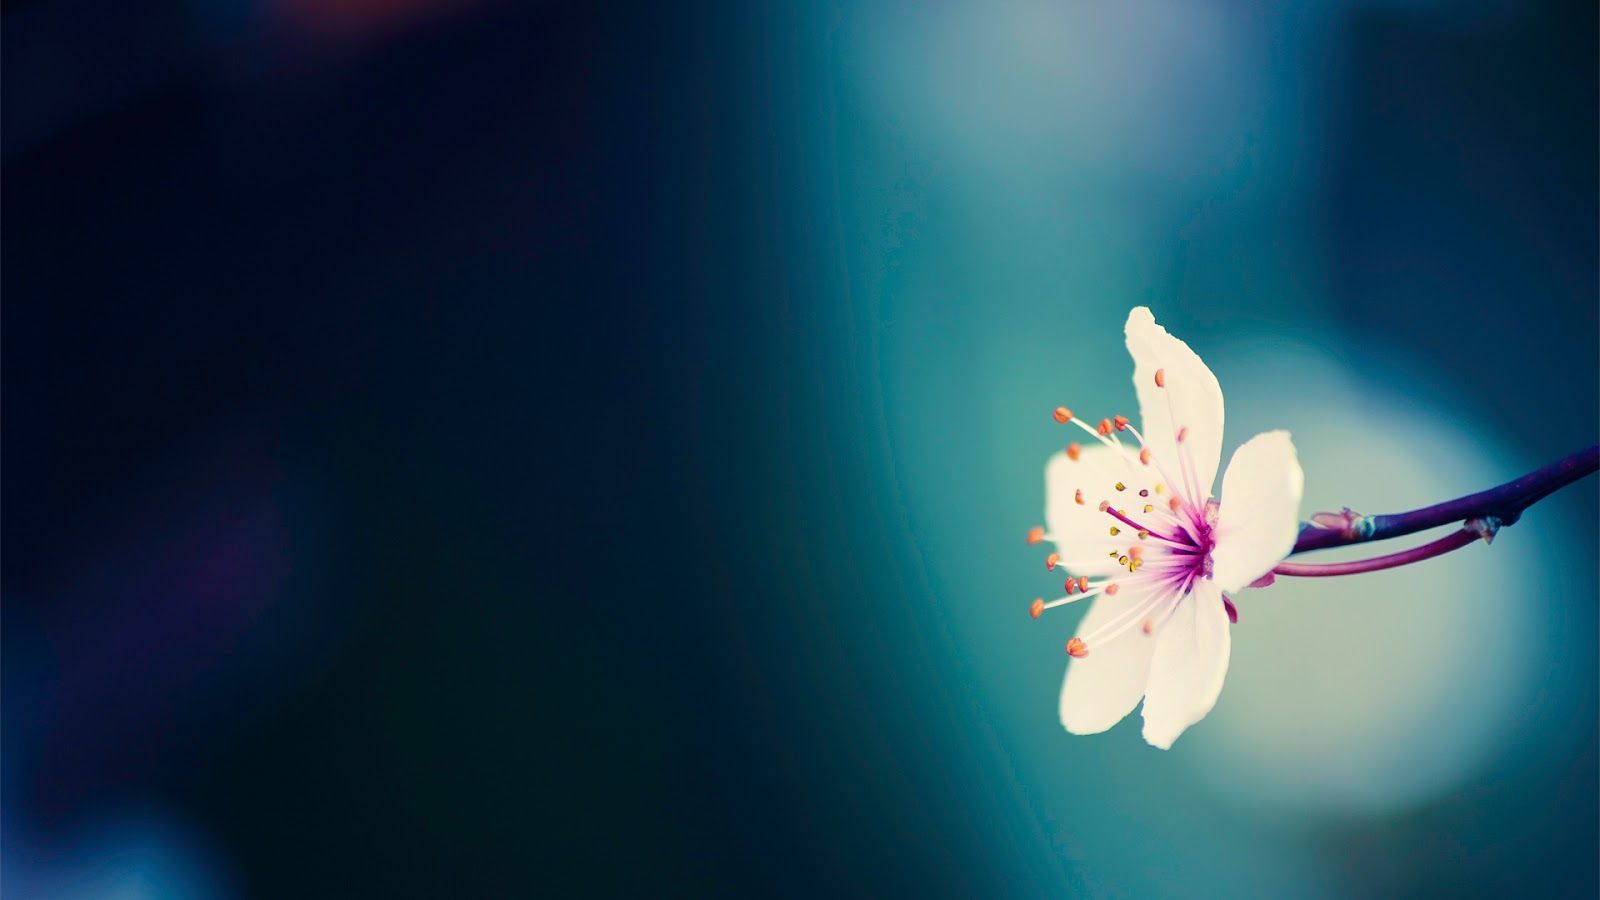 Free Pretty Background 17133 1600x900 px. Spring flowers wallpaper, Spring flowers background, Beautiful flowers wallpaper